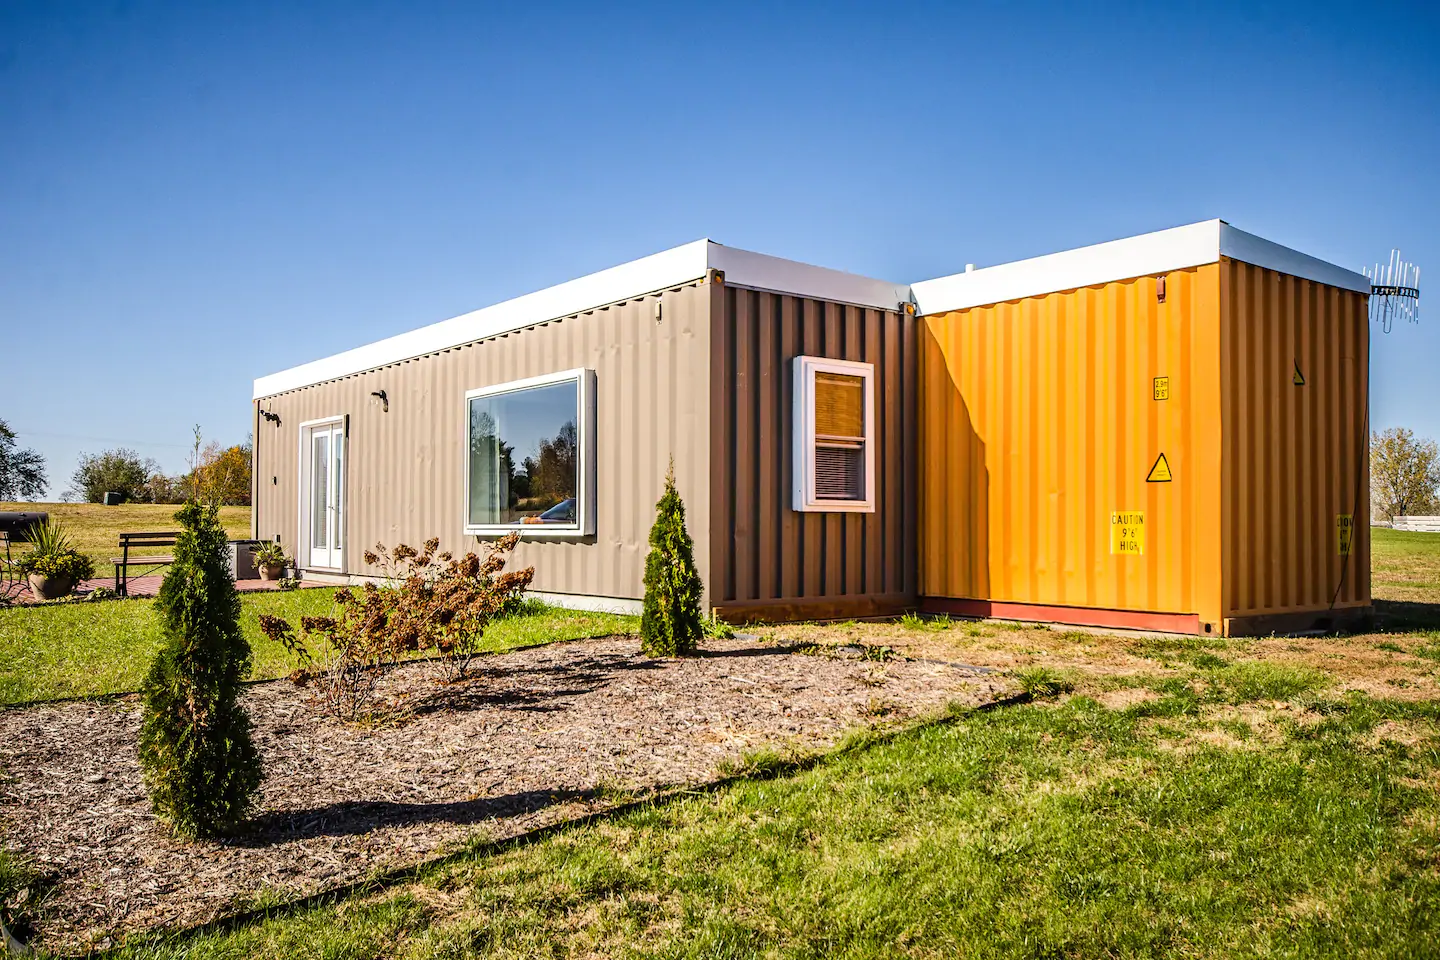 Two shipping containers together form one large living space